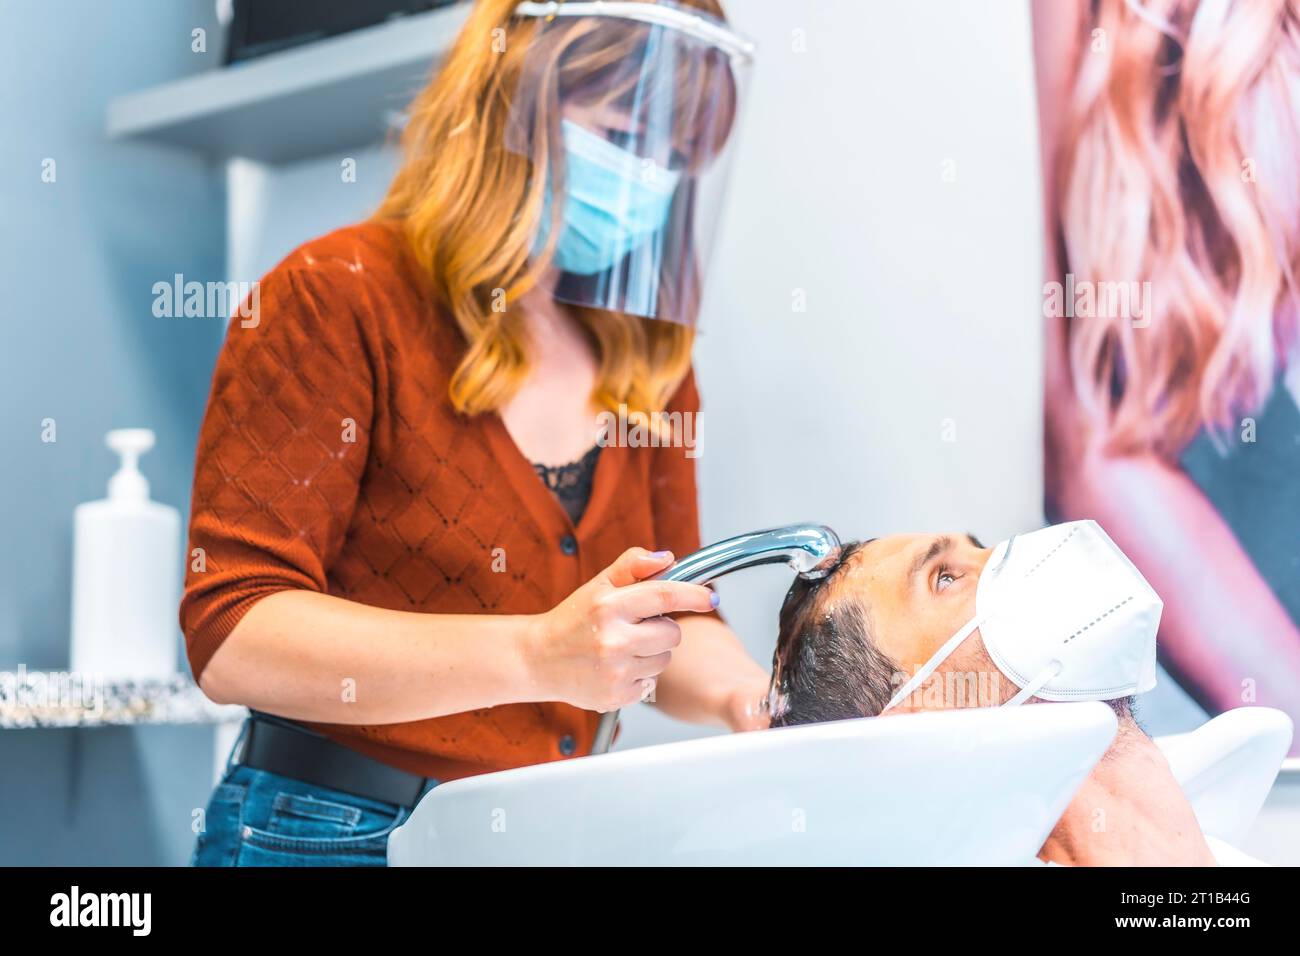 Reopening of hairdressing salons after the Coronavirus pandemic. Hairdresser with face mask and protective screen, covid-19. Social distance, new Stock Photo